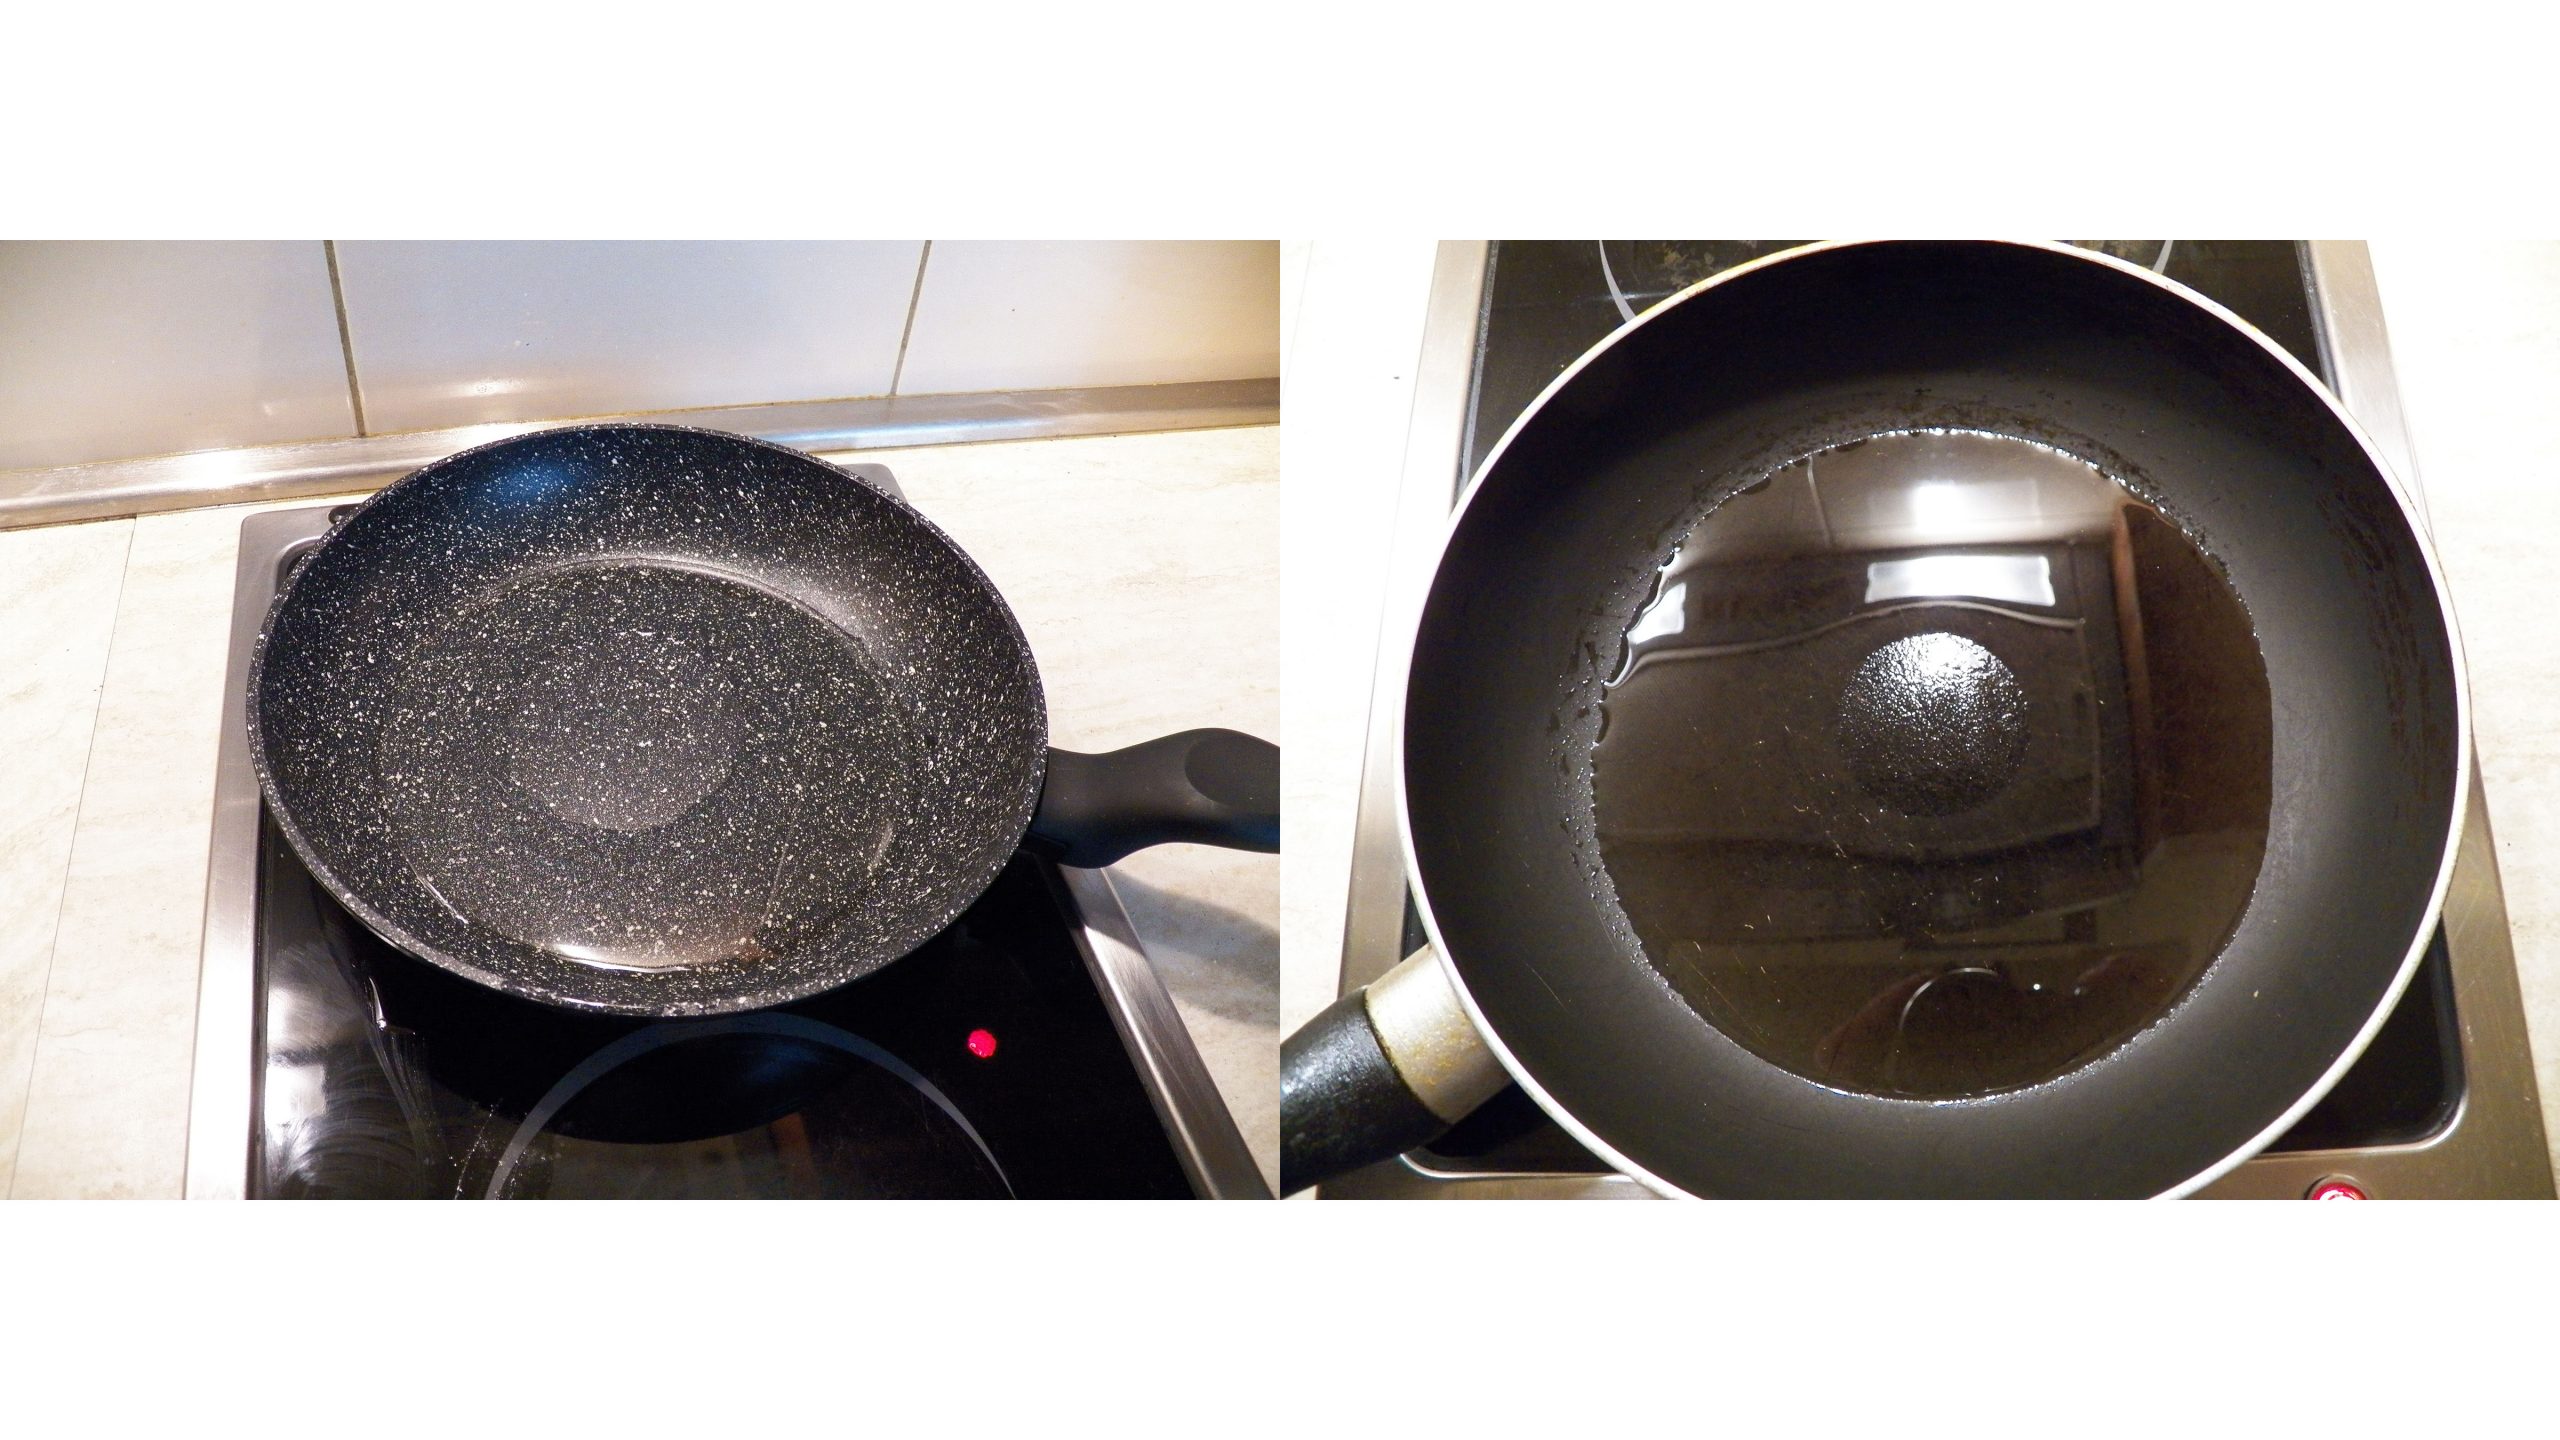 Why Food Sticks to Nonstick Frying Pans - AIP Publishing LLC